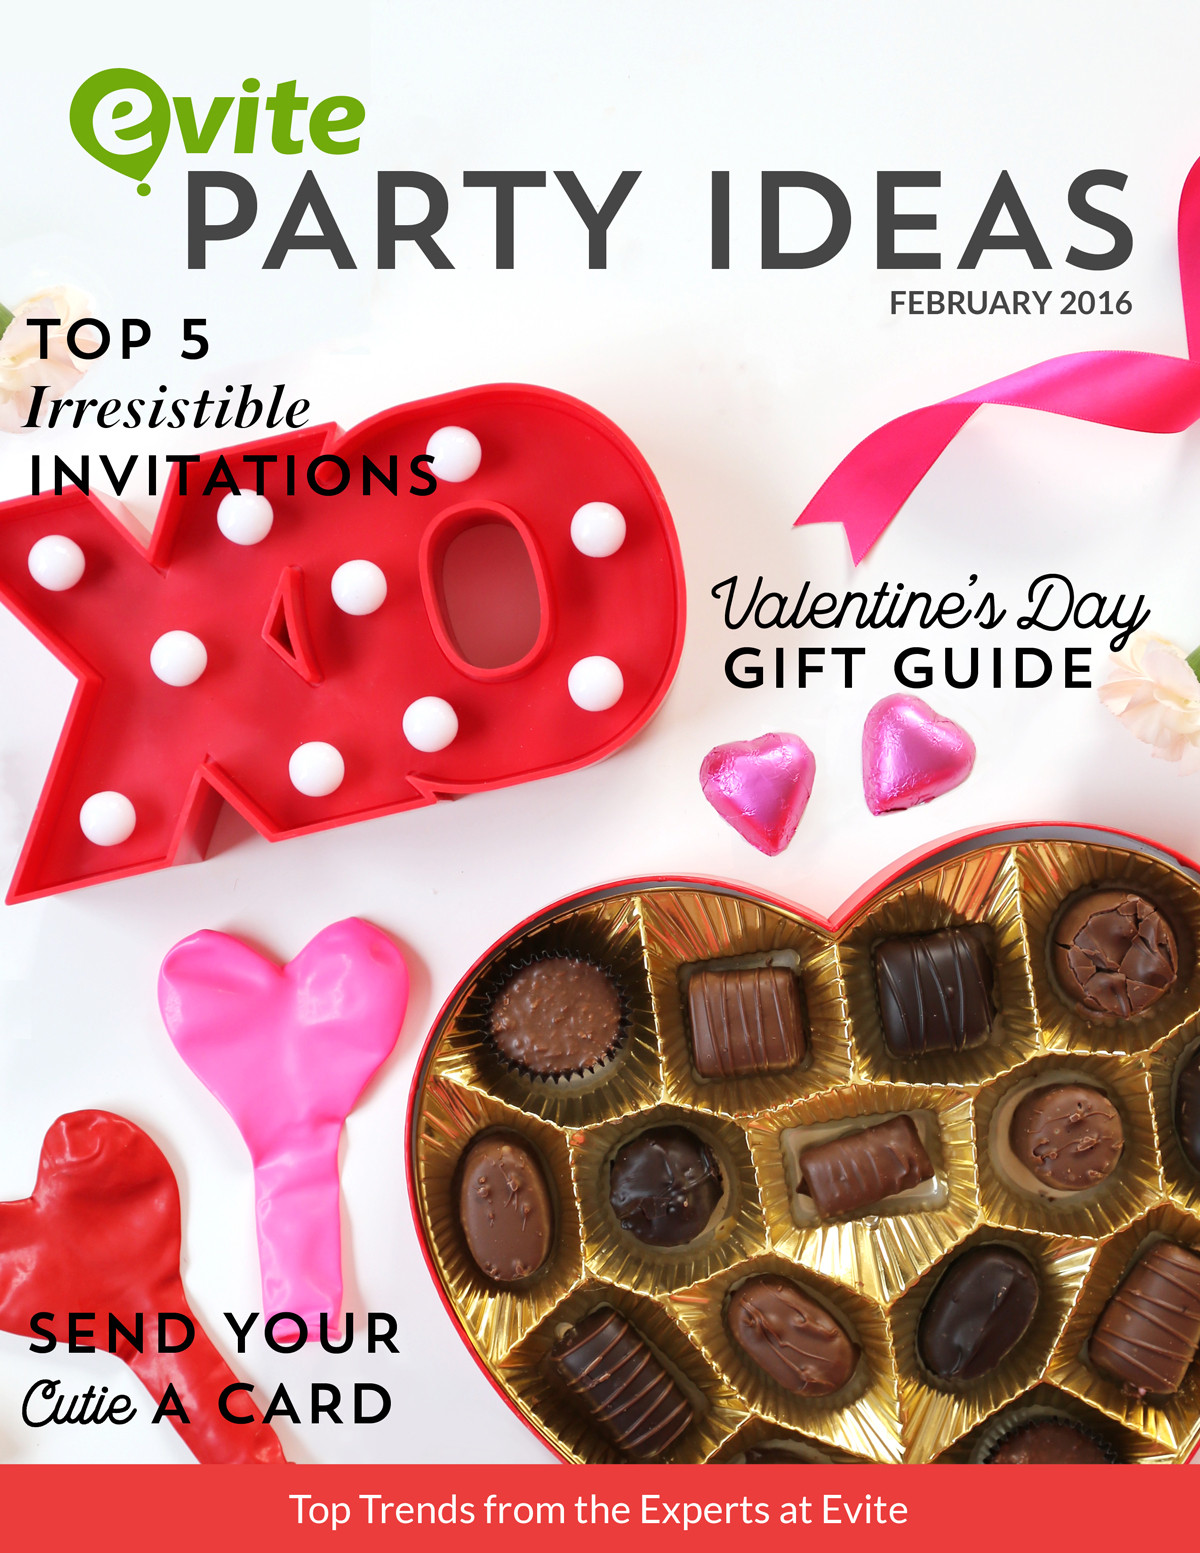 Valentines Day Gifts 2016
 Evite Party Ideas Valentine s Day Gift Guide 2016 Evite